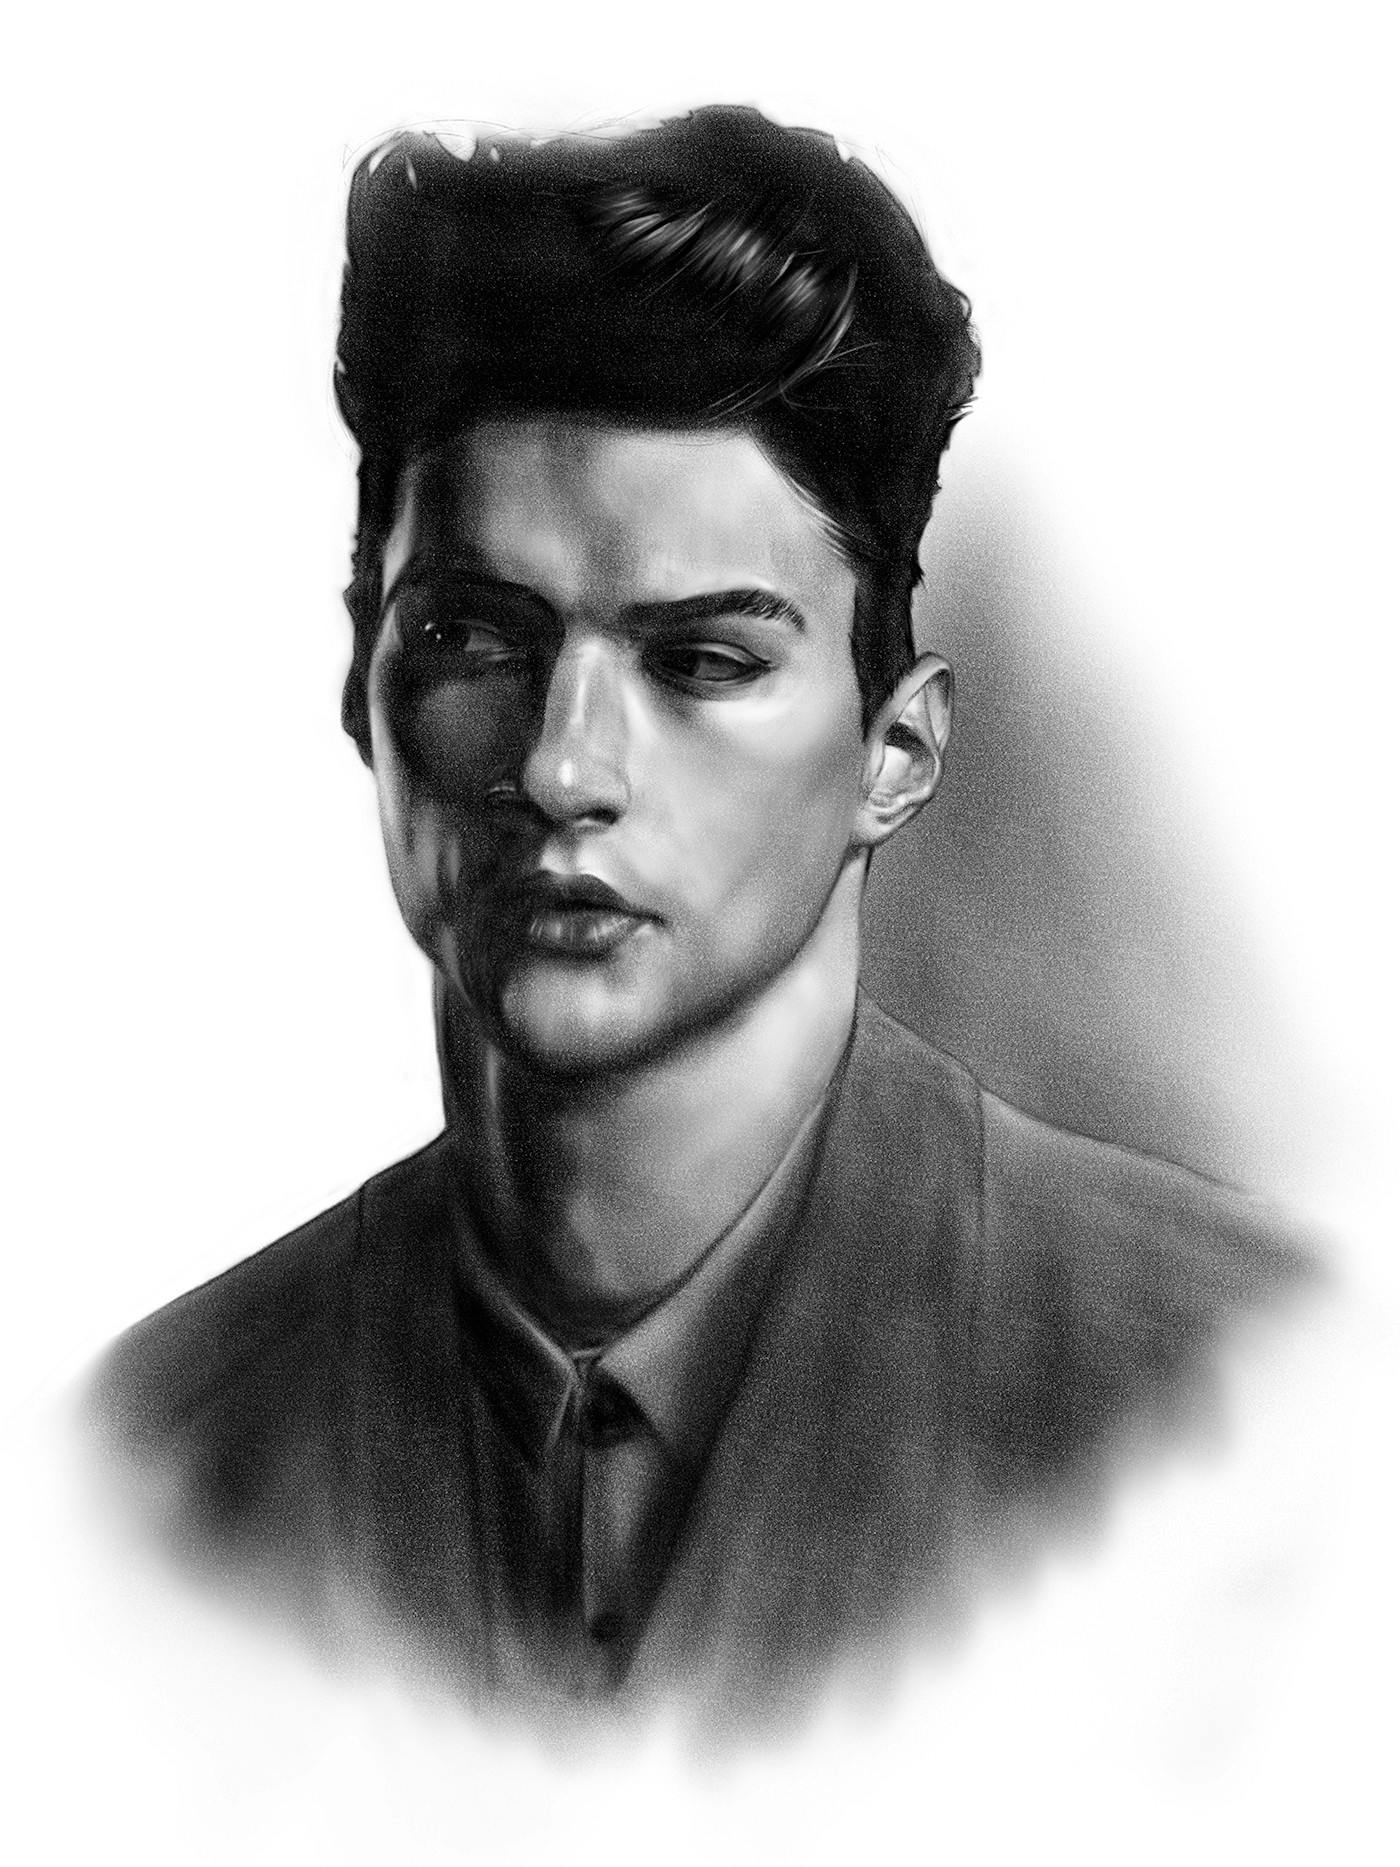 A black and white digital drawing imitating graphite of a young man with a tall swoop of hair on top, close cropped on the sides.